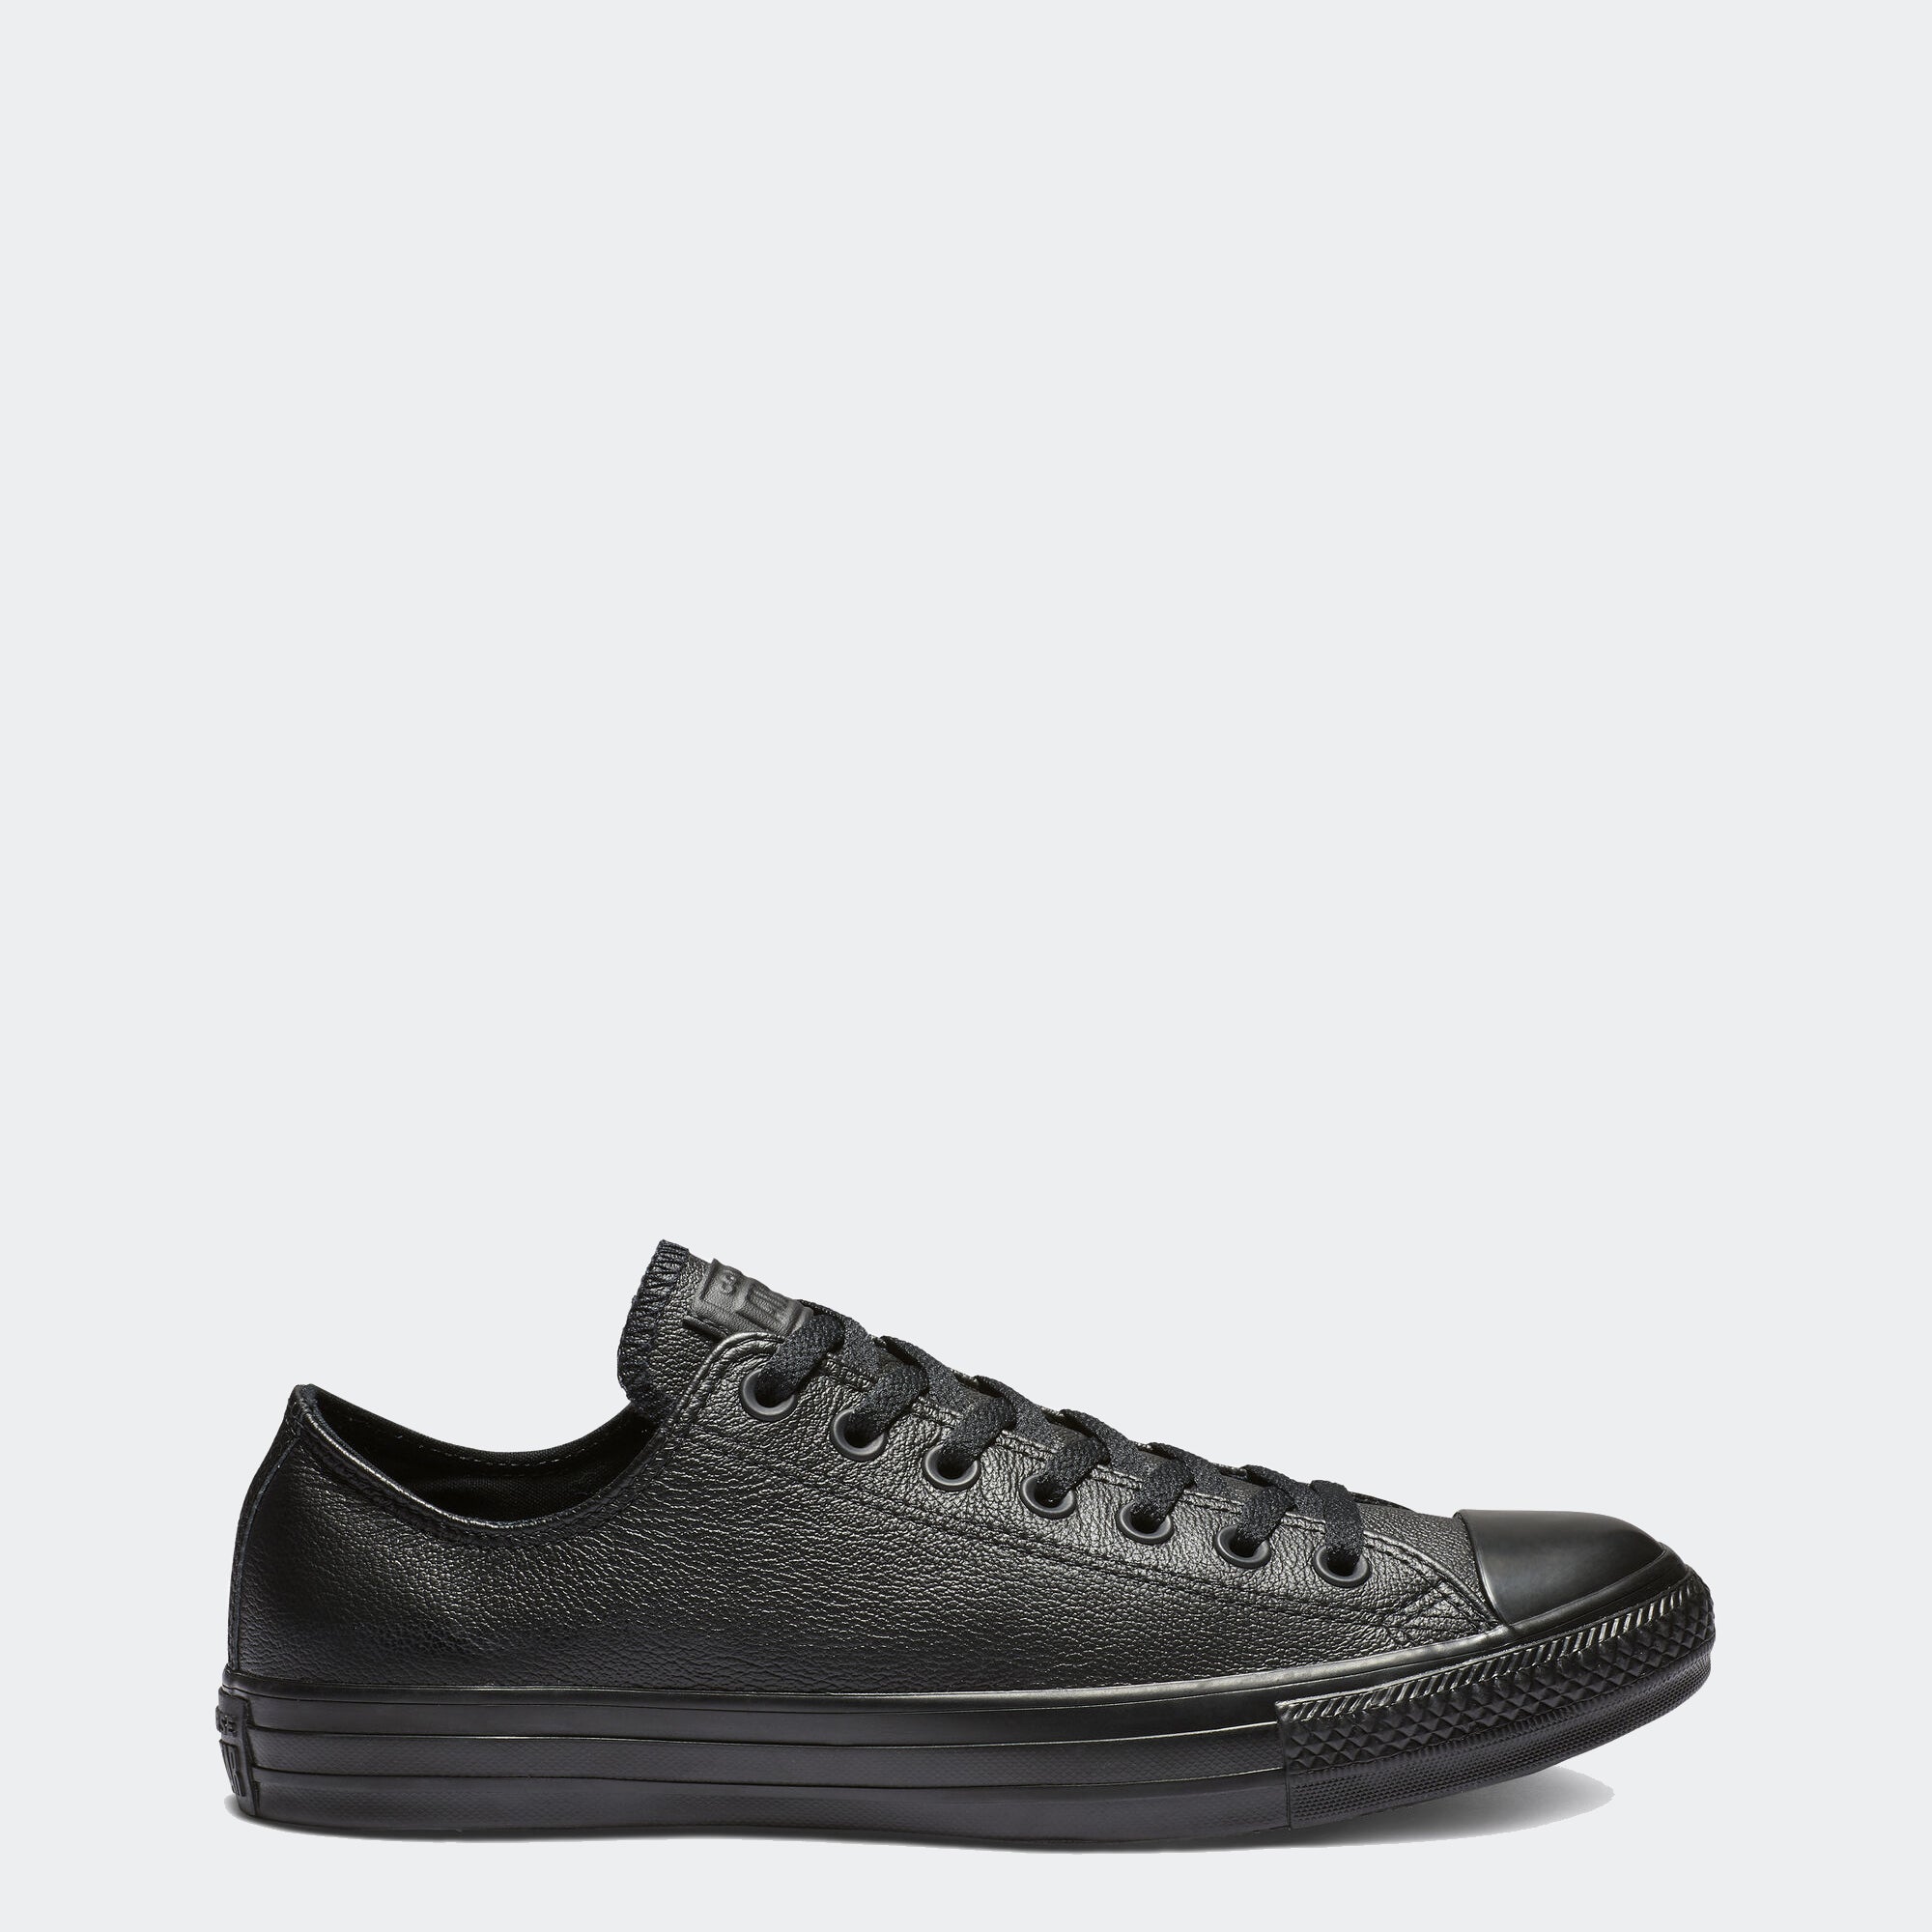 Converse All Star Leather Shoes | Chicago City Sports